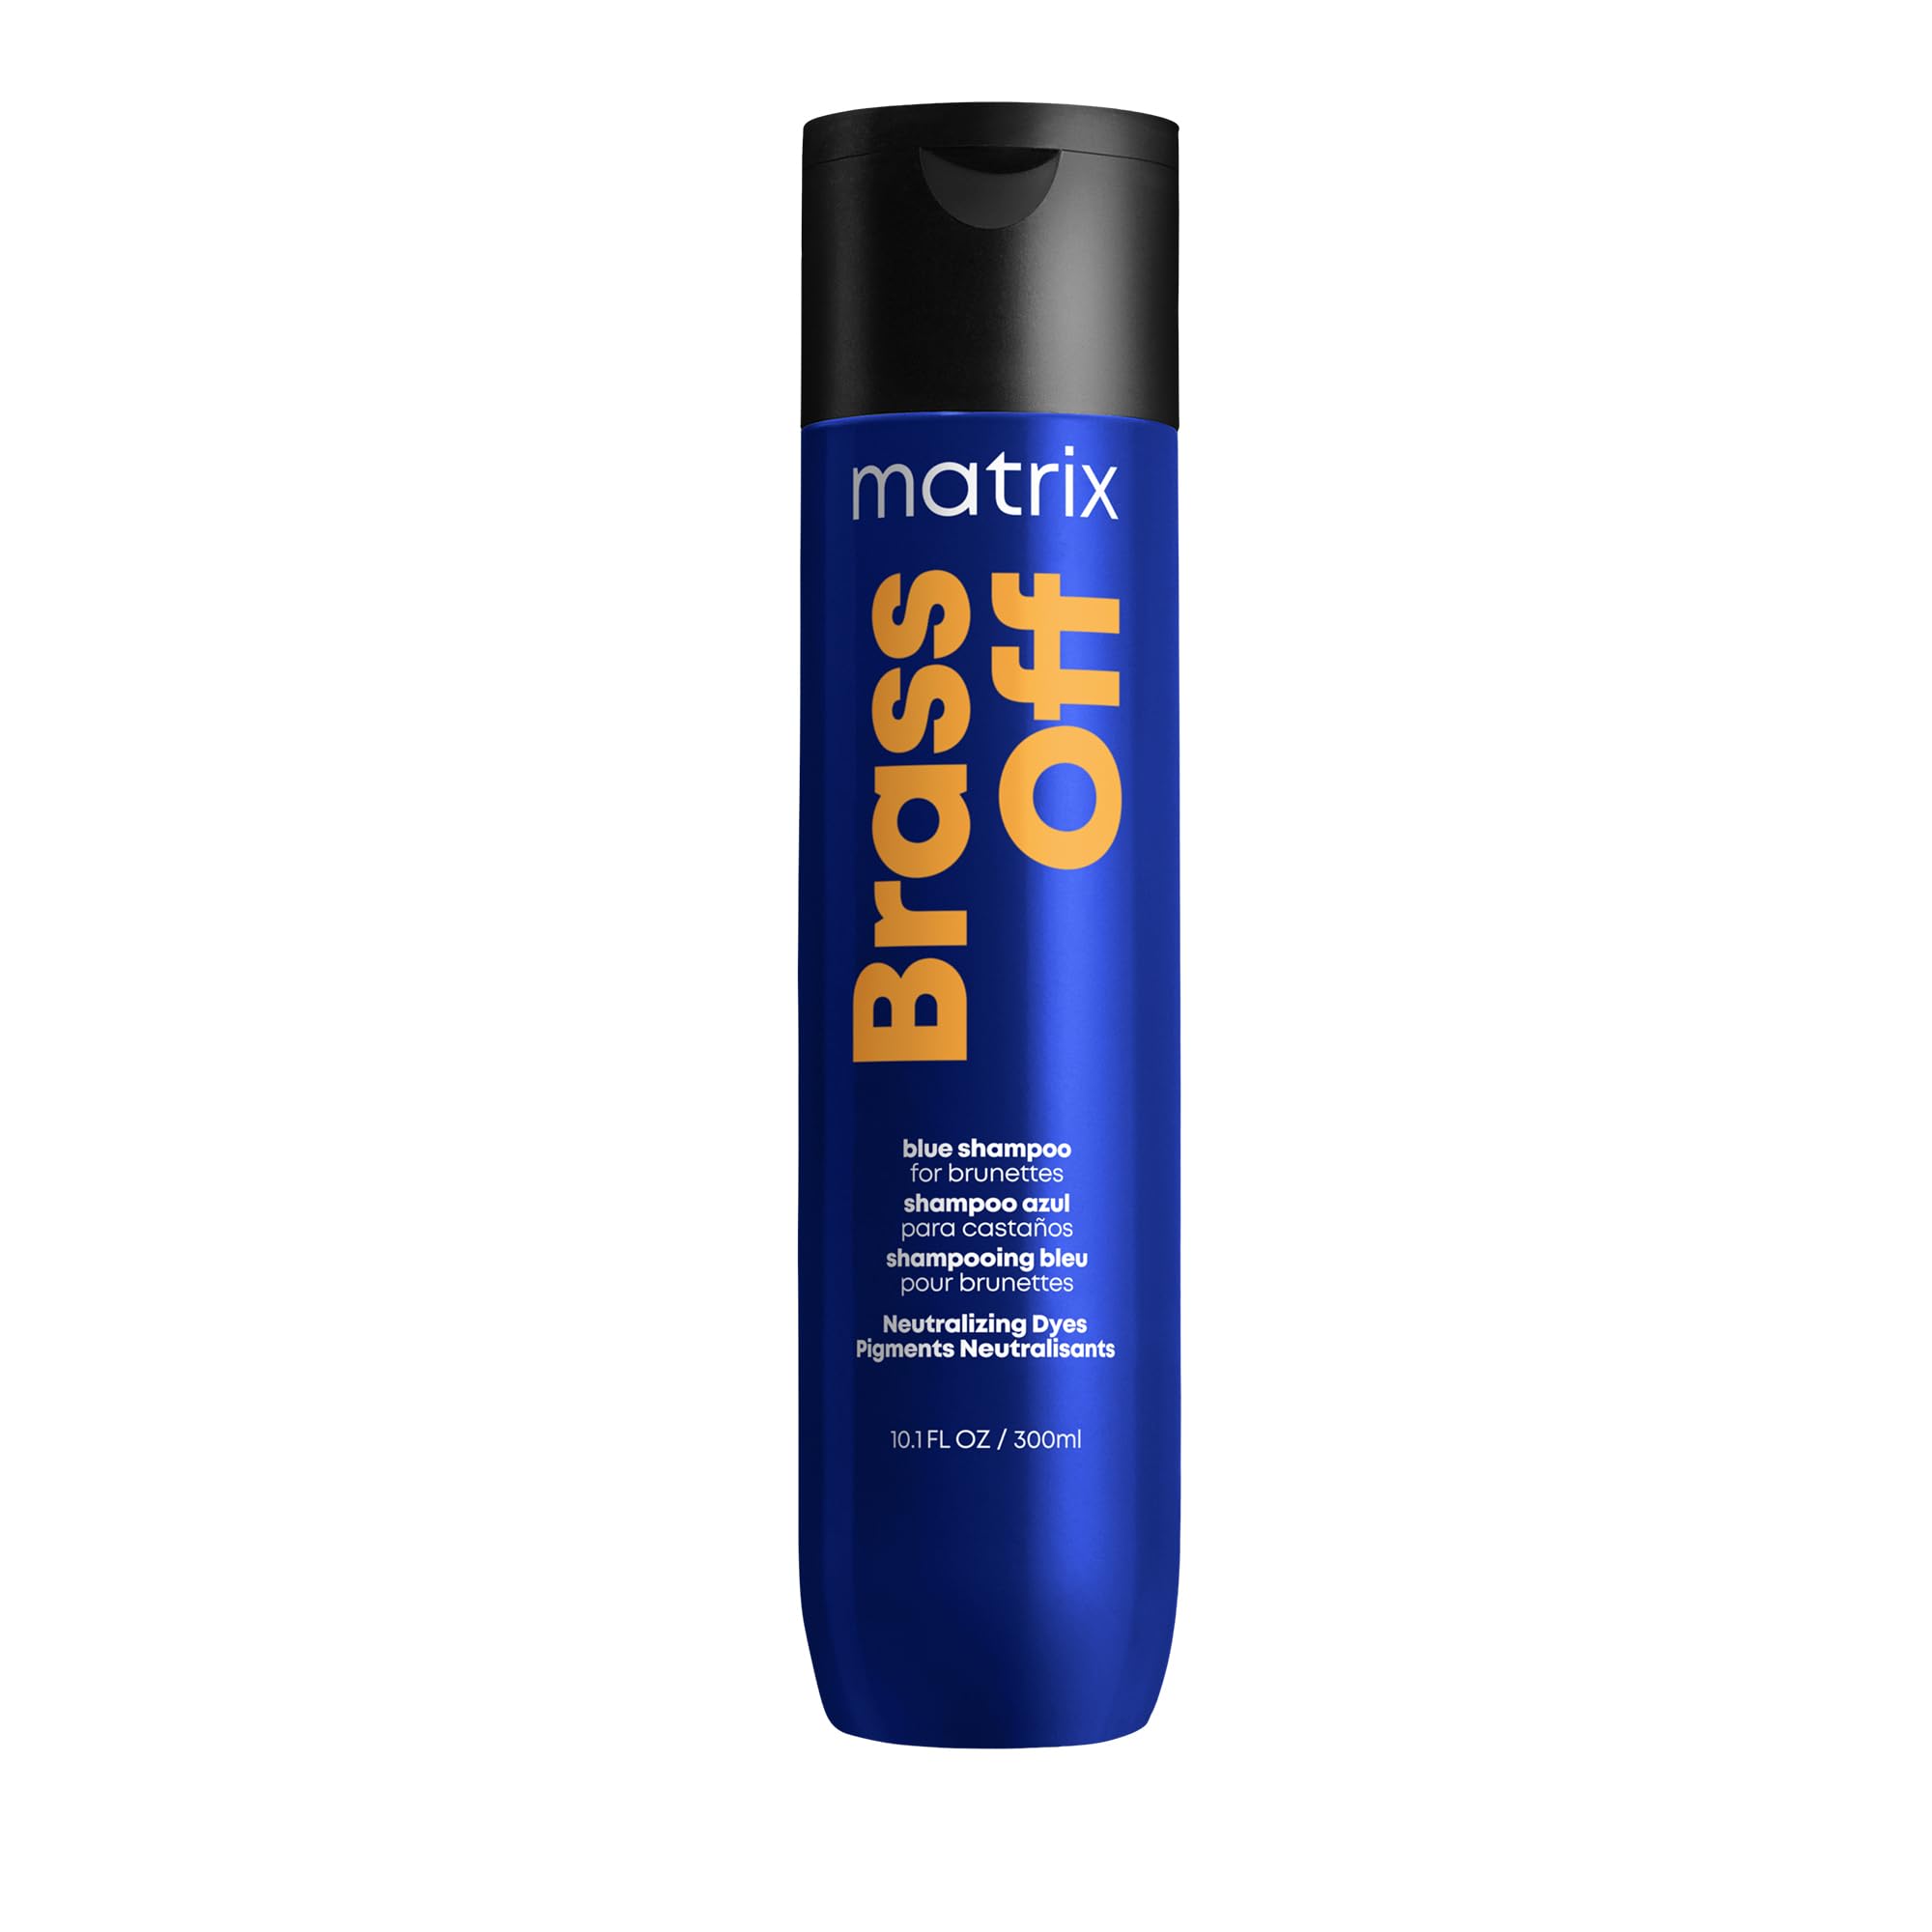 Matrix Brass Off Blue Shampoo | Color Depositing | Refreshes Hair & Neutralizes Brassy Tones | For Lightened Brunettes or Dark Blondes | For Color Treated Hair | Toning Shampoo | Packaging May Vary